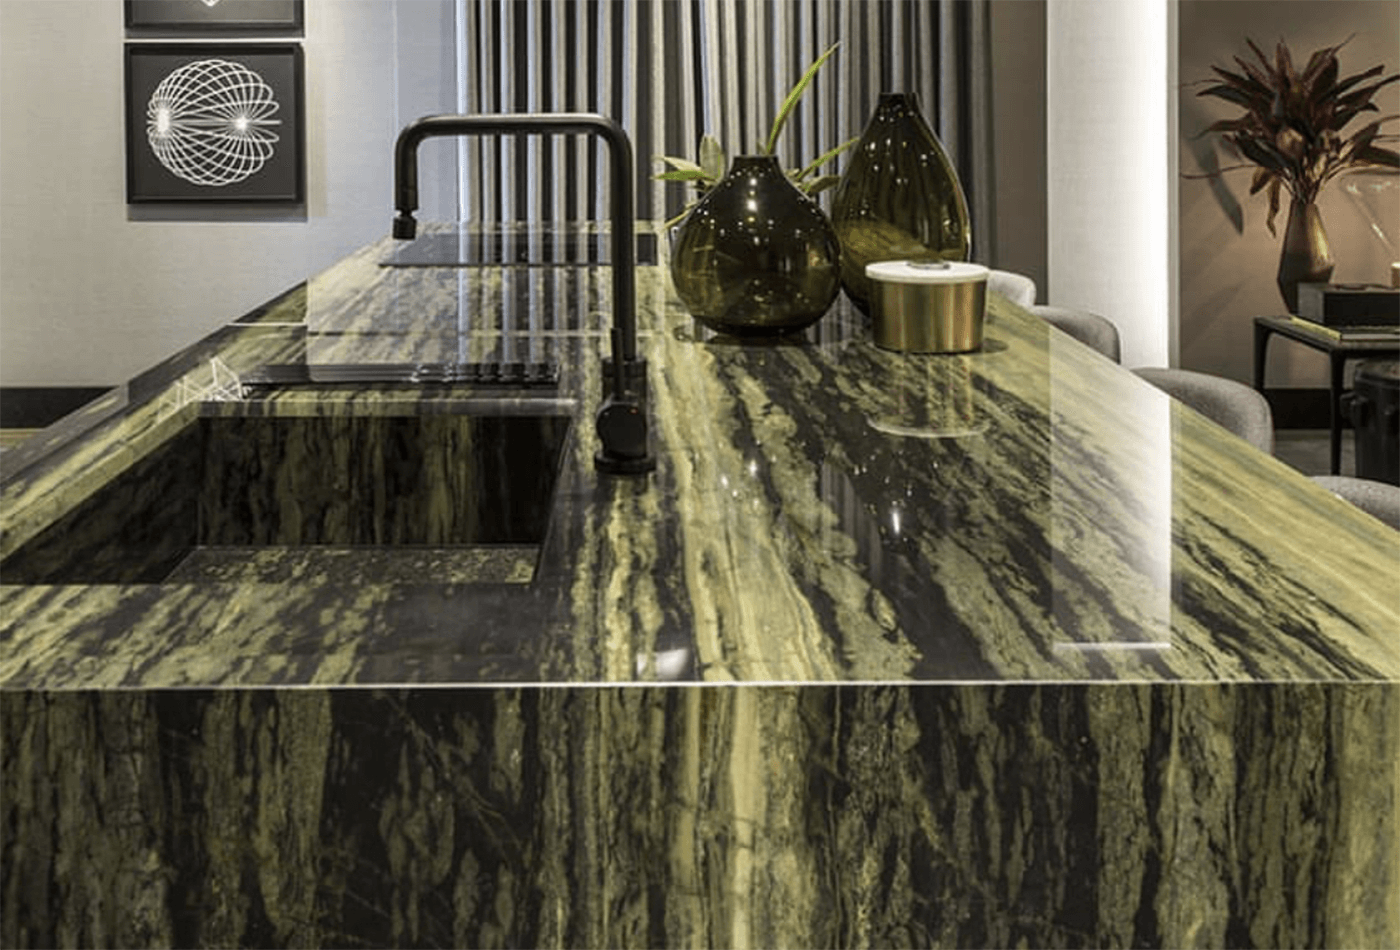 The Verde Bamboo Worktop Adds a Touch of Nature